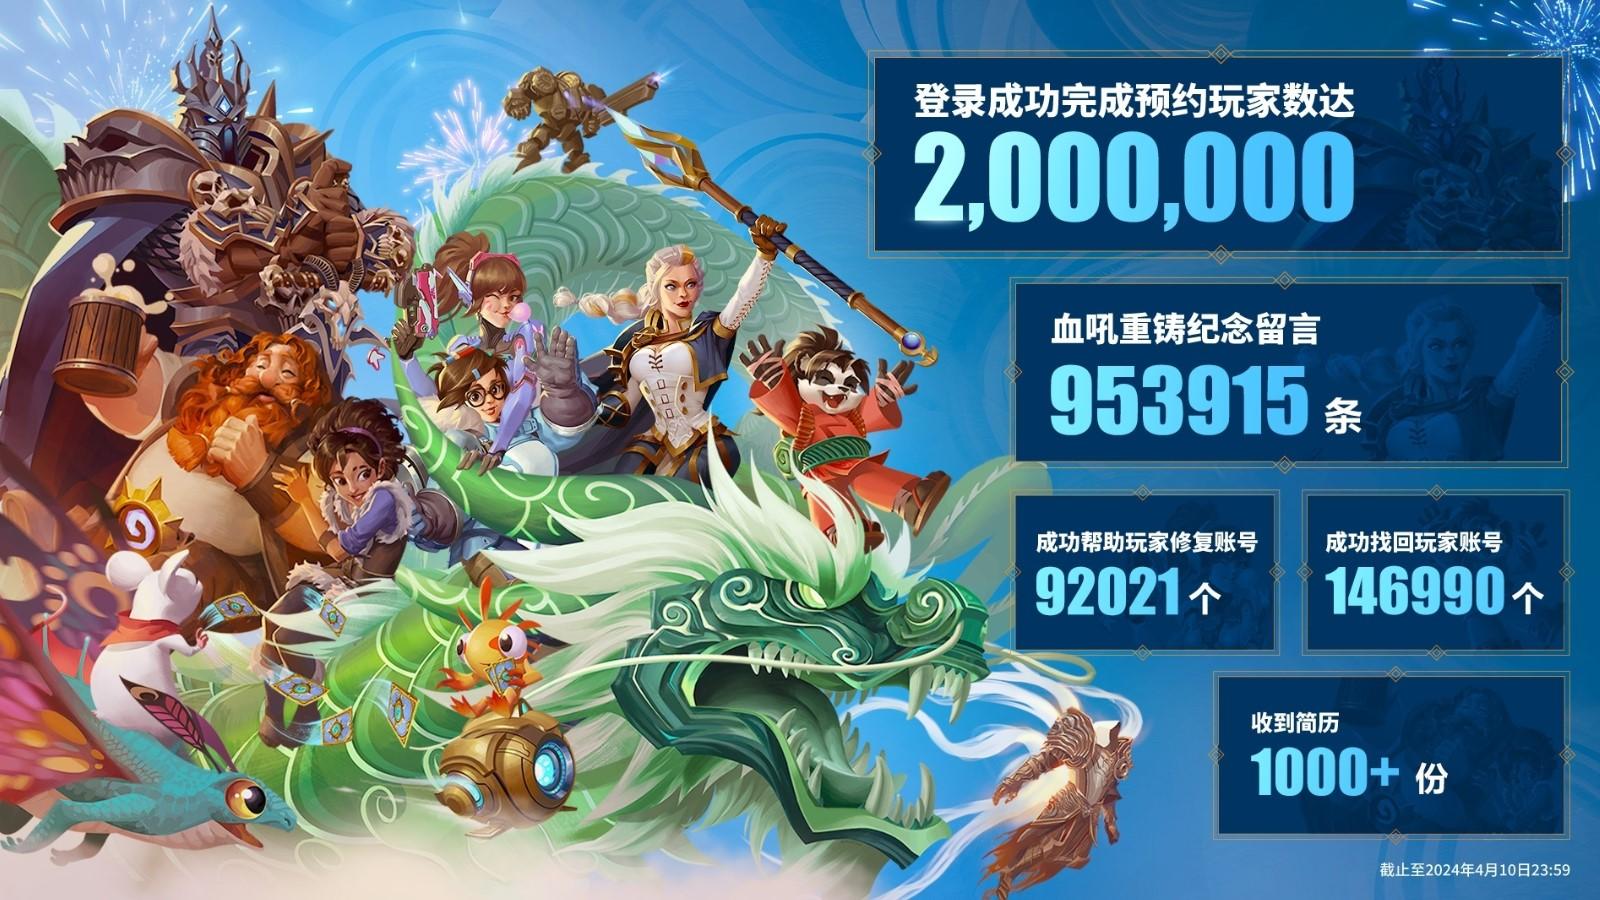 The breakdown of signup numbers for WoW from Blizzard China